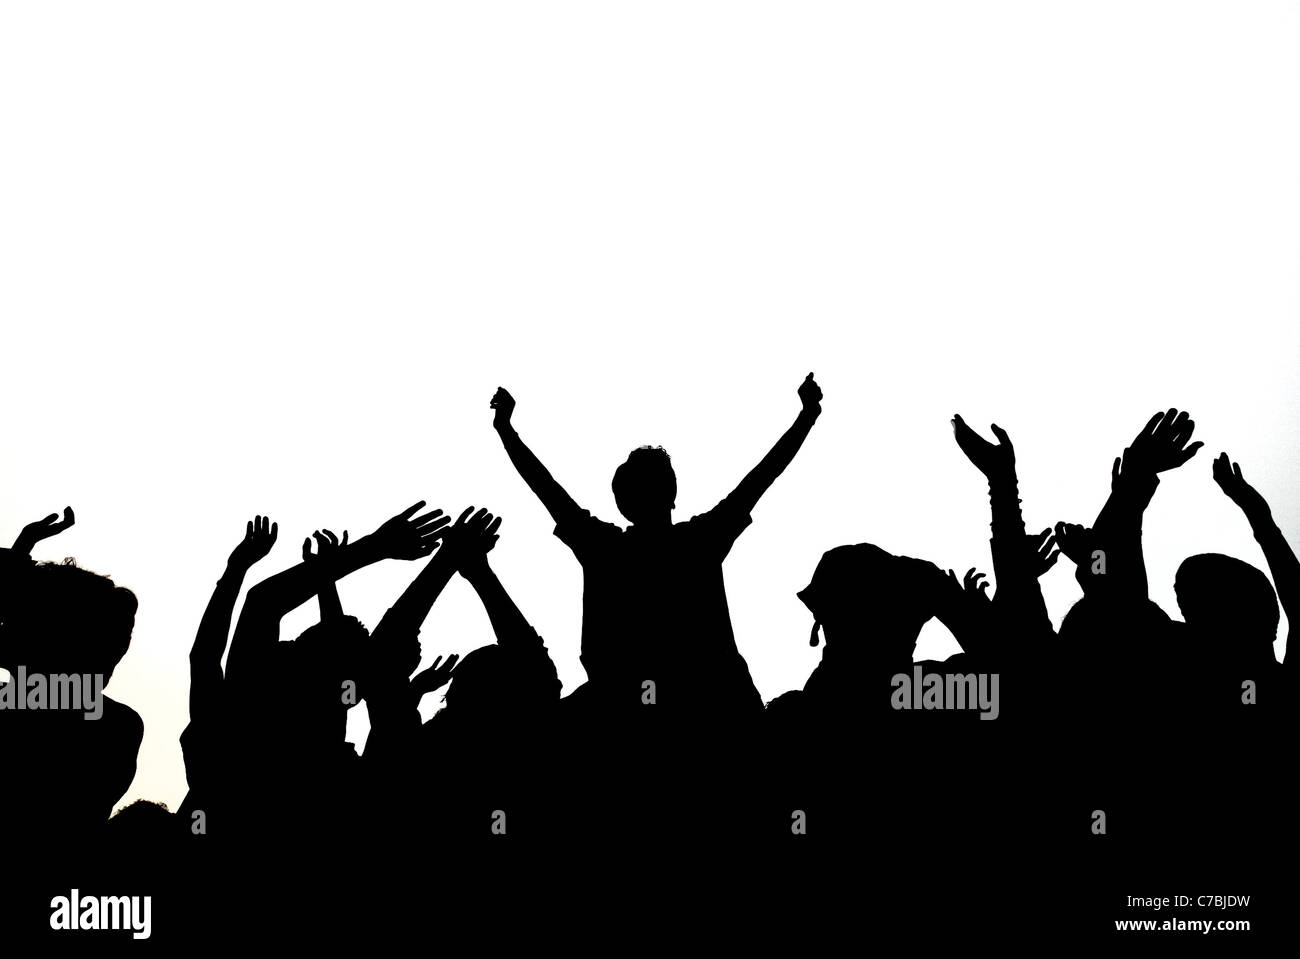 Crowd of people silhouette Stock Photo - Alamy